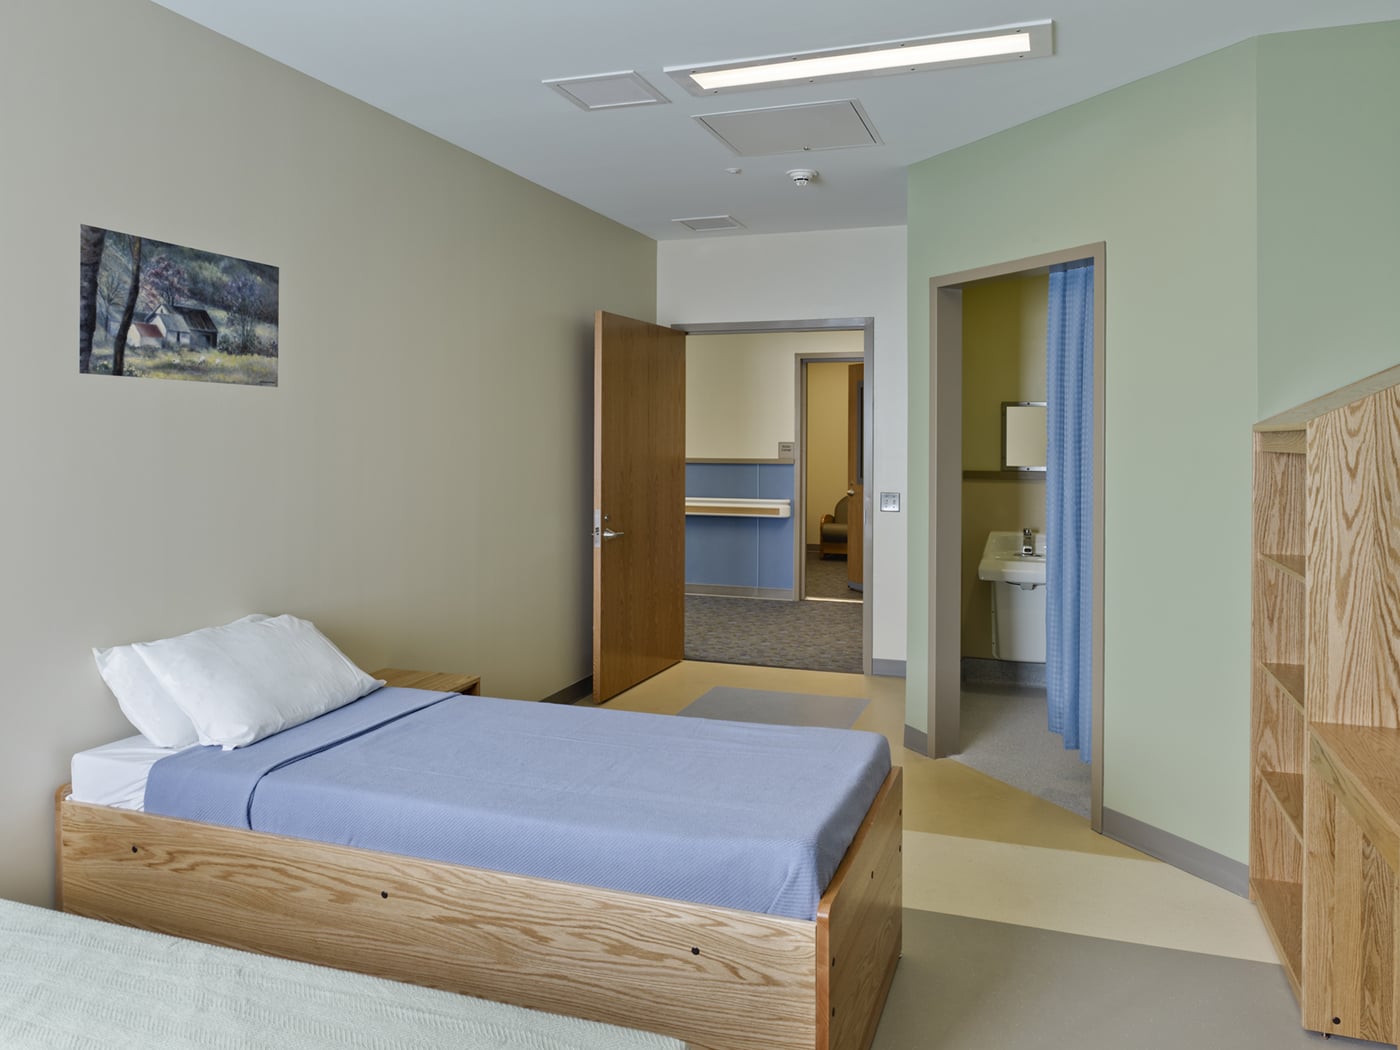 shared patient room